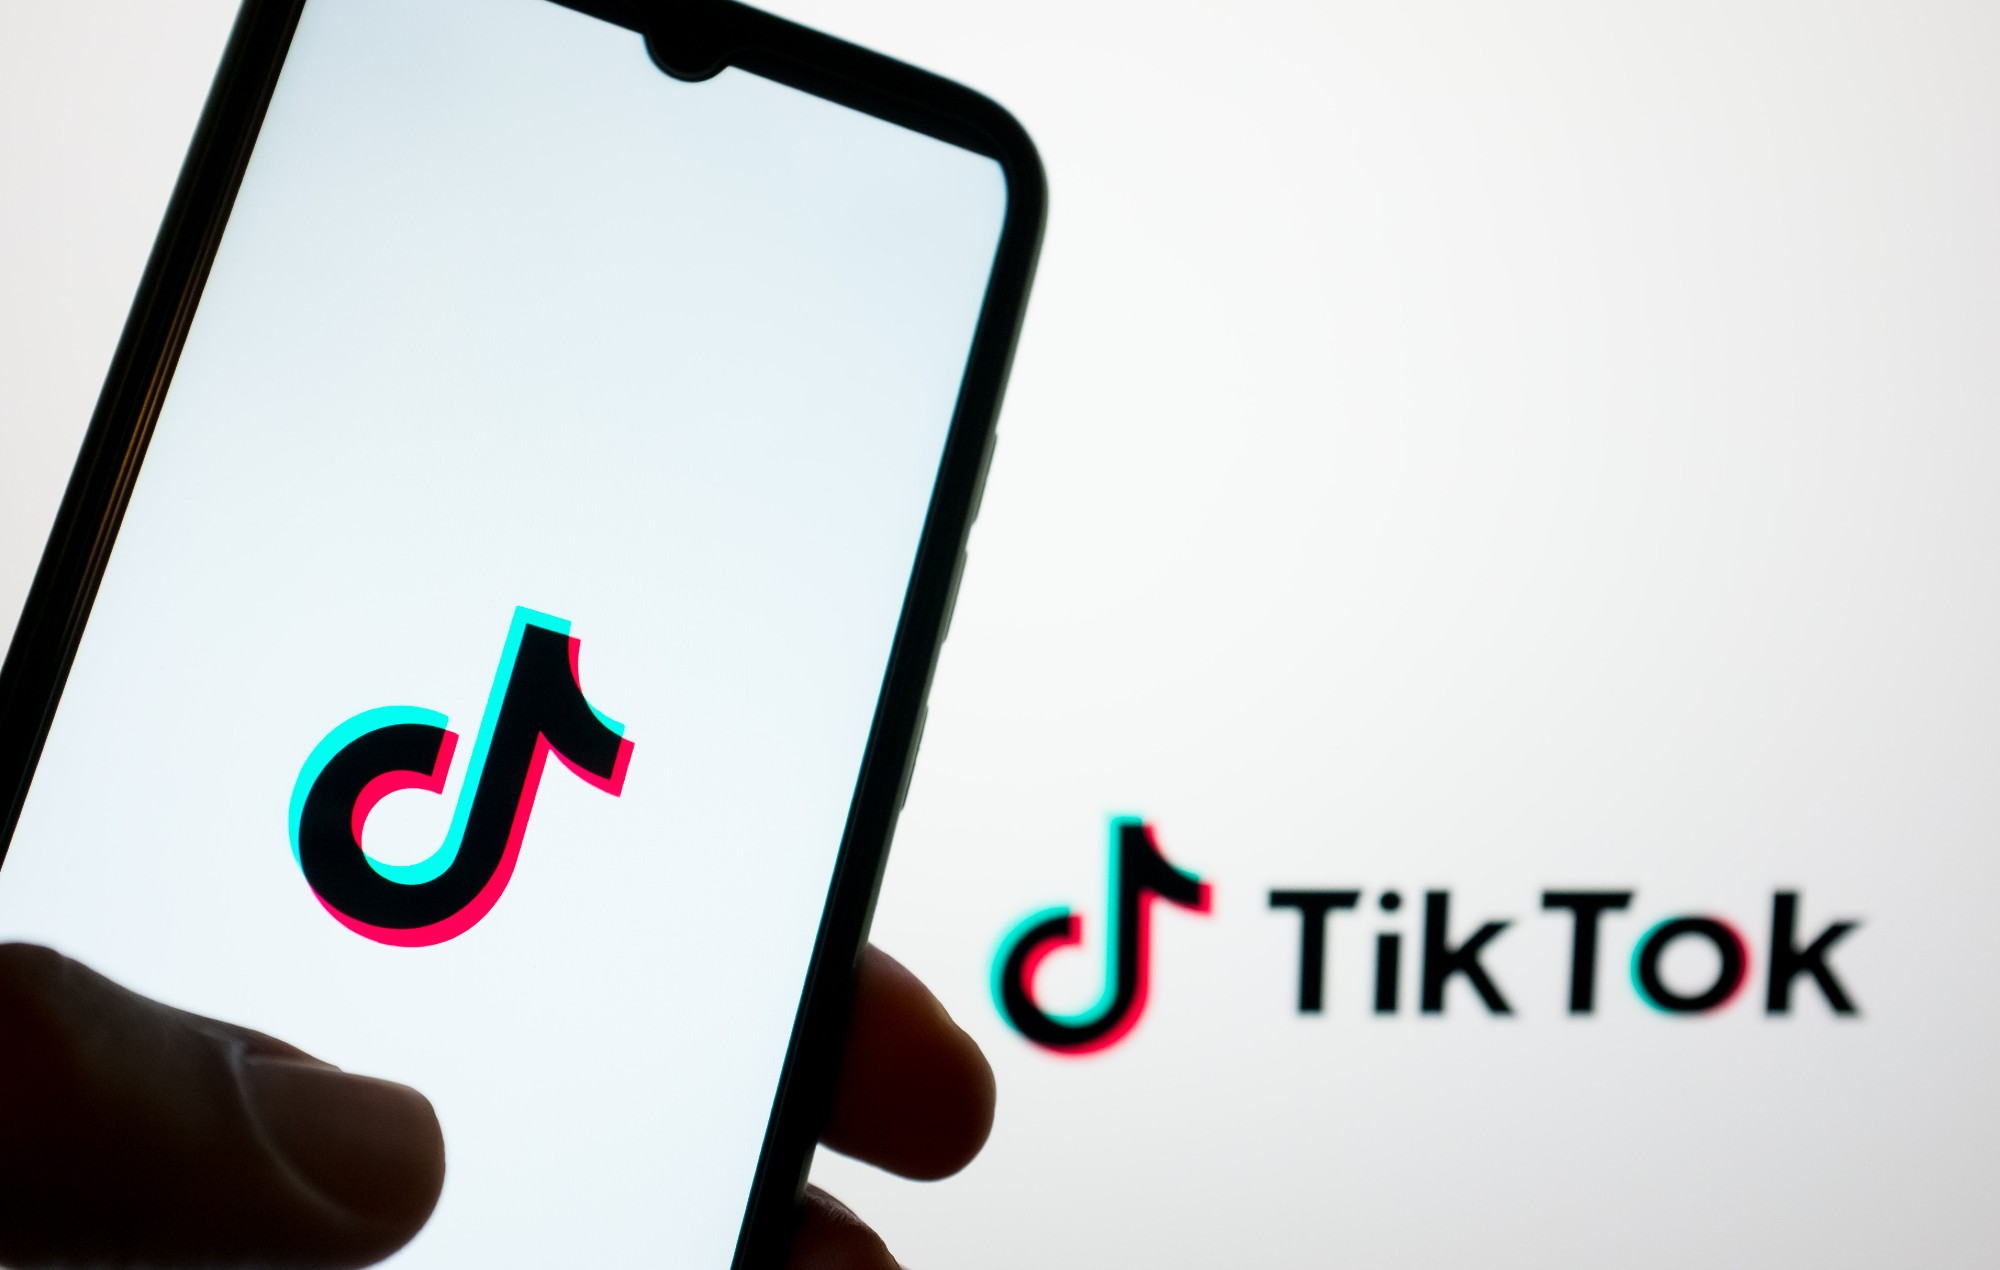 US Congress approves bill to ban TikTok in the United States unless ByteDance sells the platform